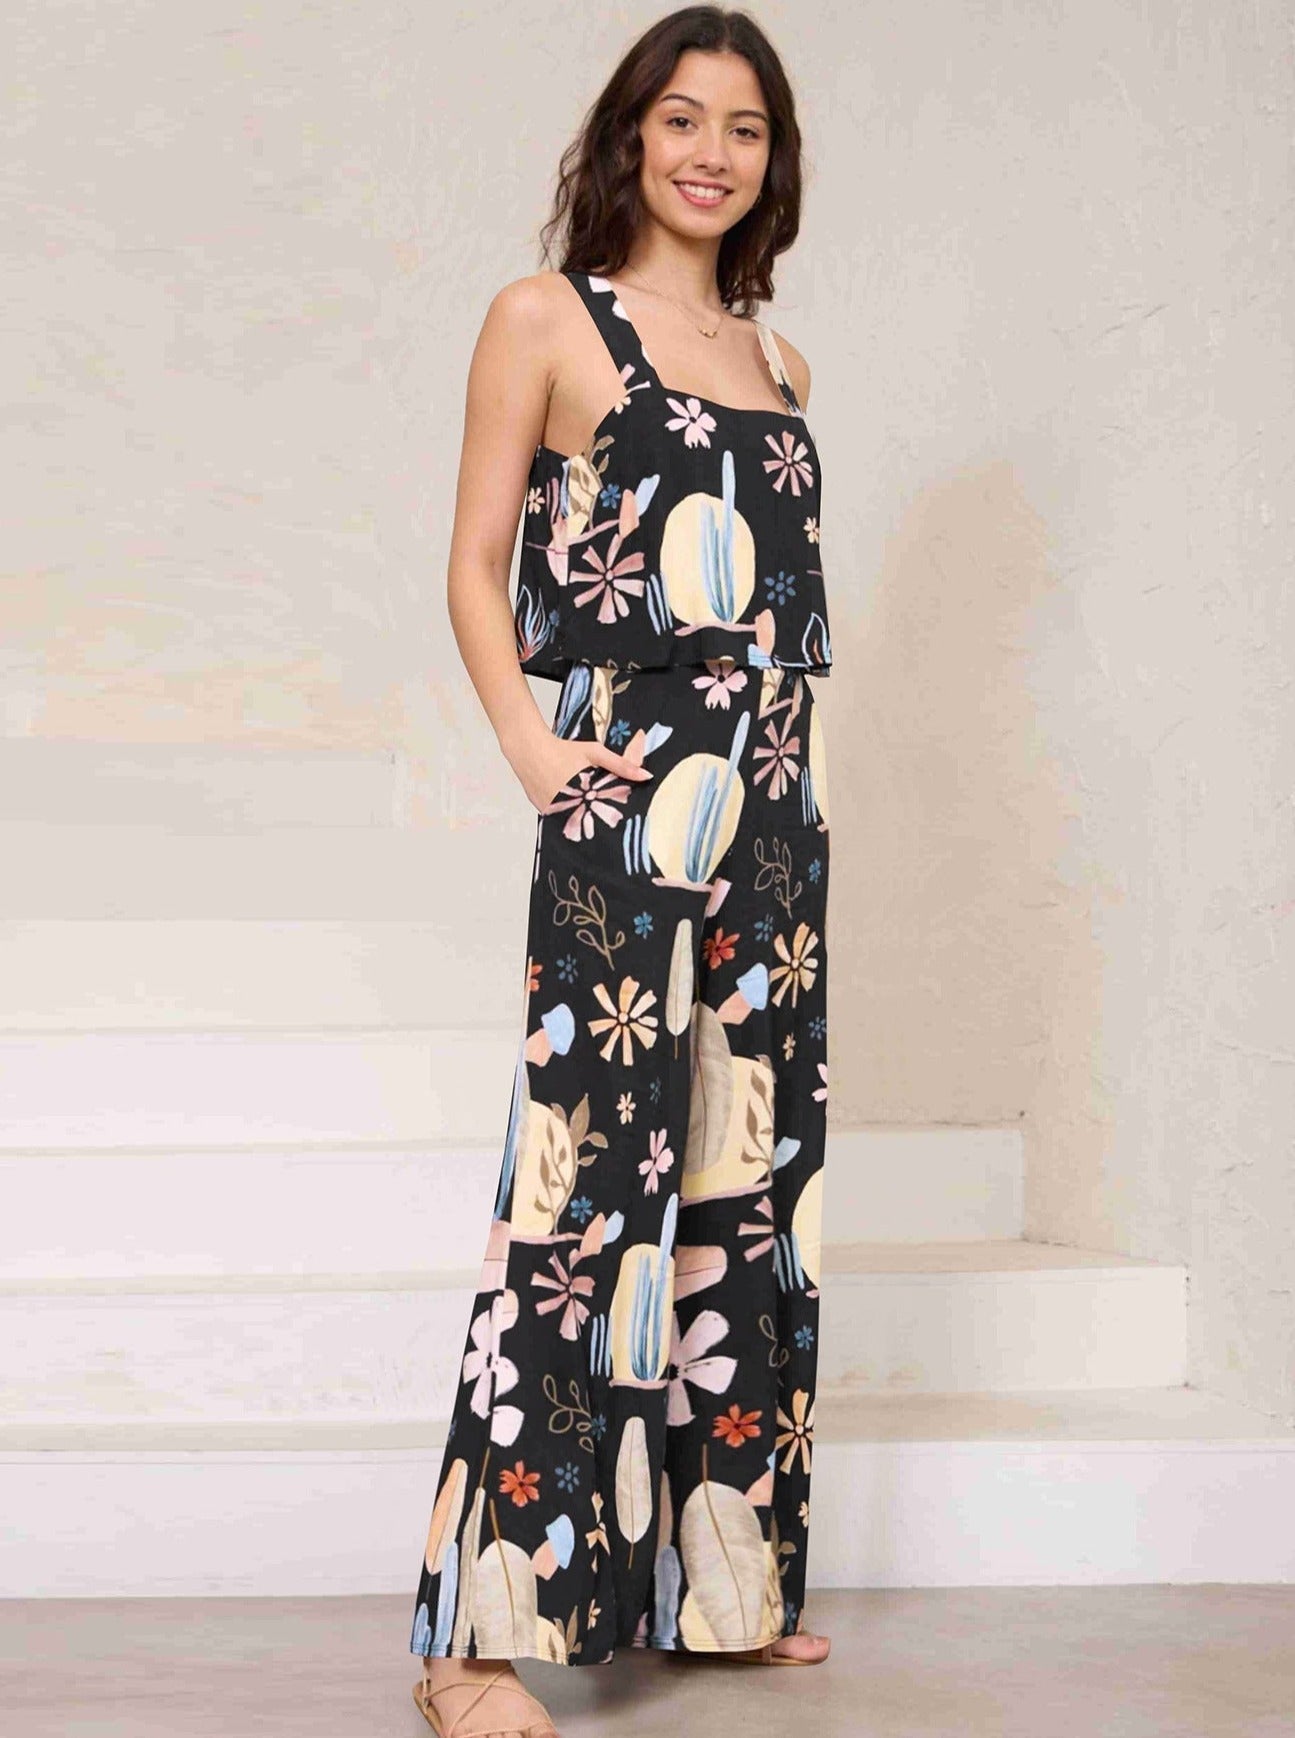 Two Piece Graphic Printed Sleeveless Shirt and Pants Set